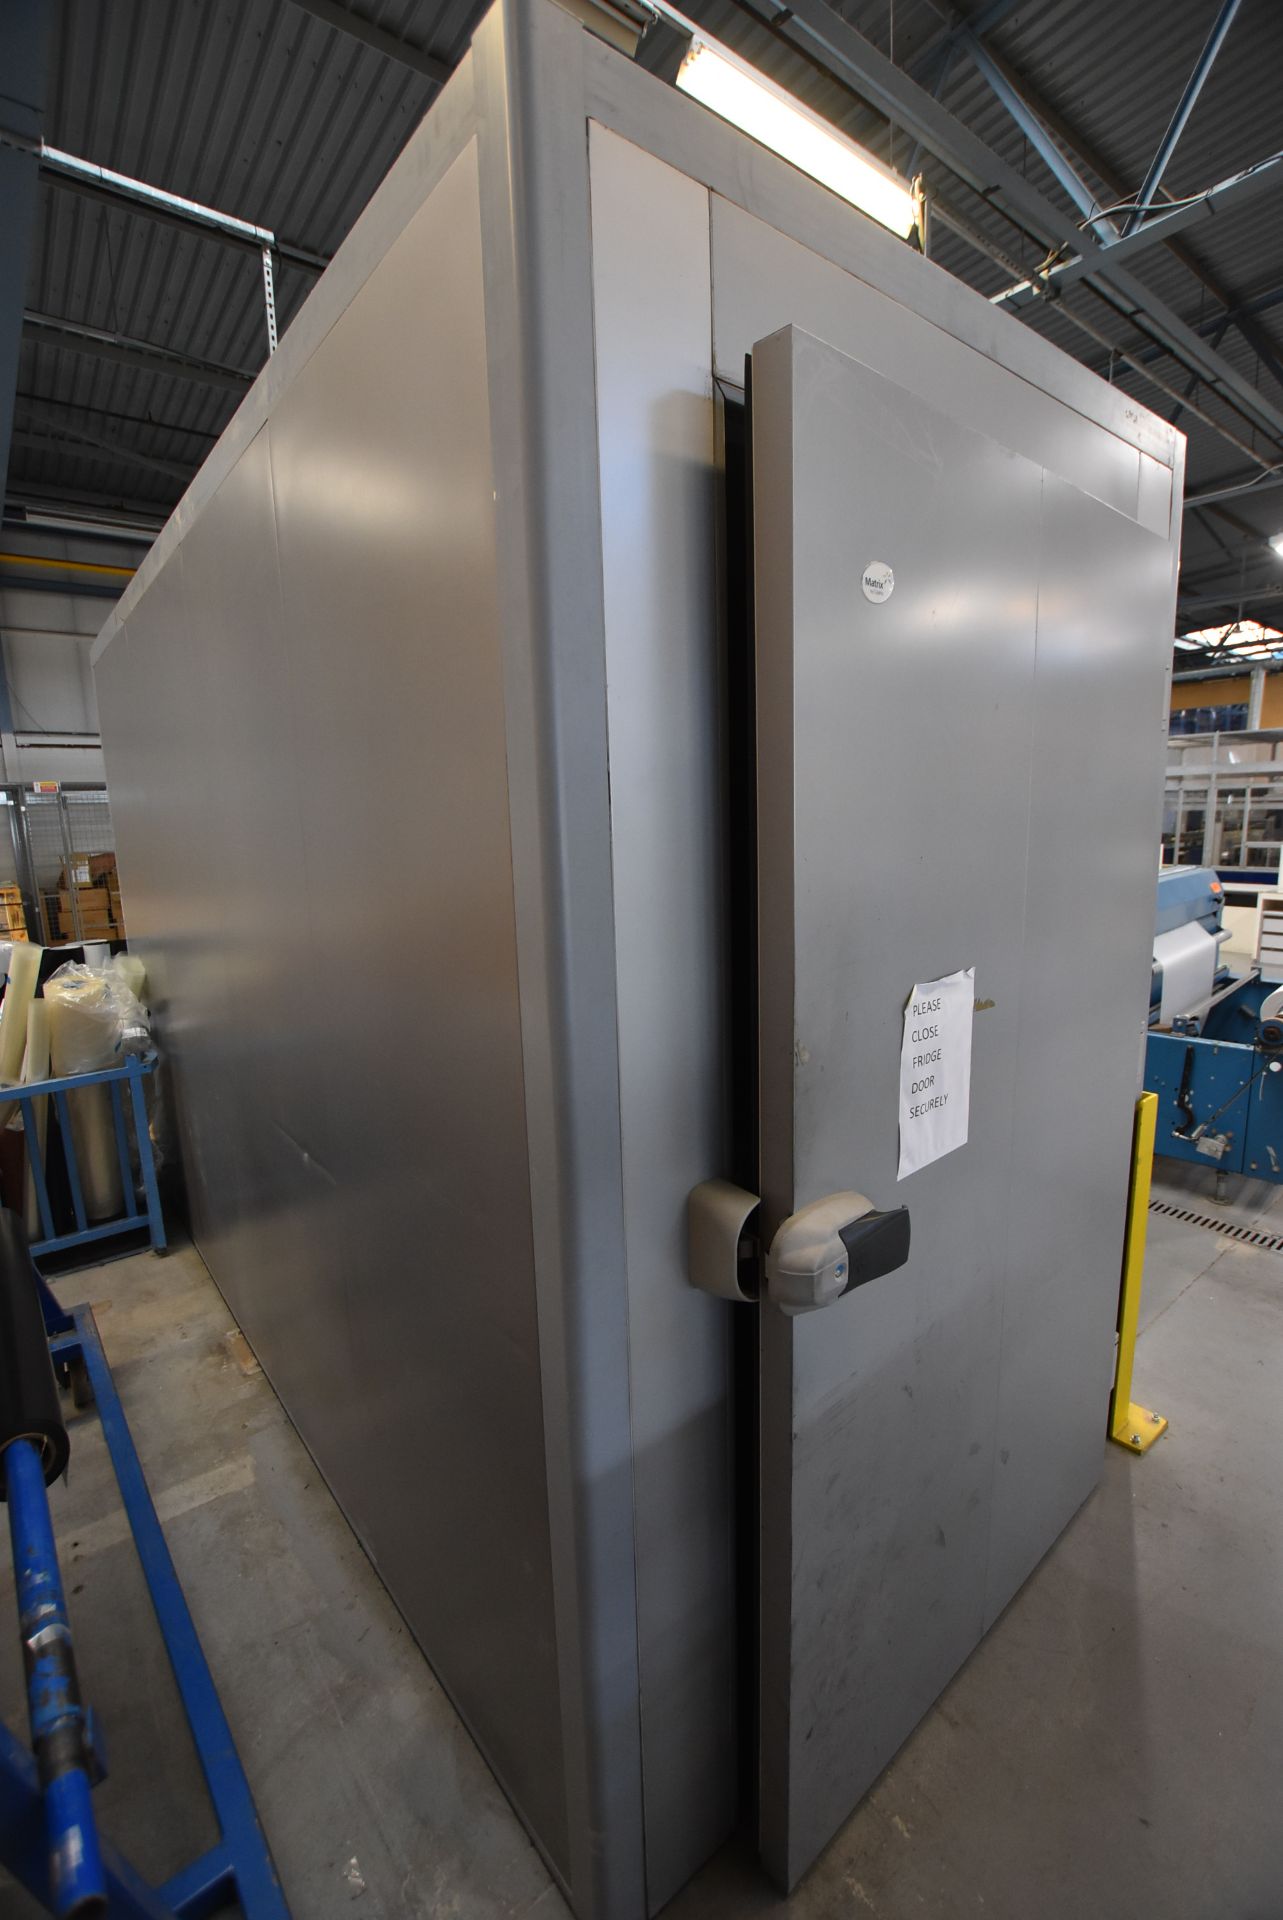 Cold Solutions/ Matrix Refrigerated Cold Room, approx. 4m x 2m x 2.5m, with refrigeration equipment - Image 3 of 4